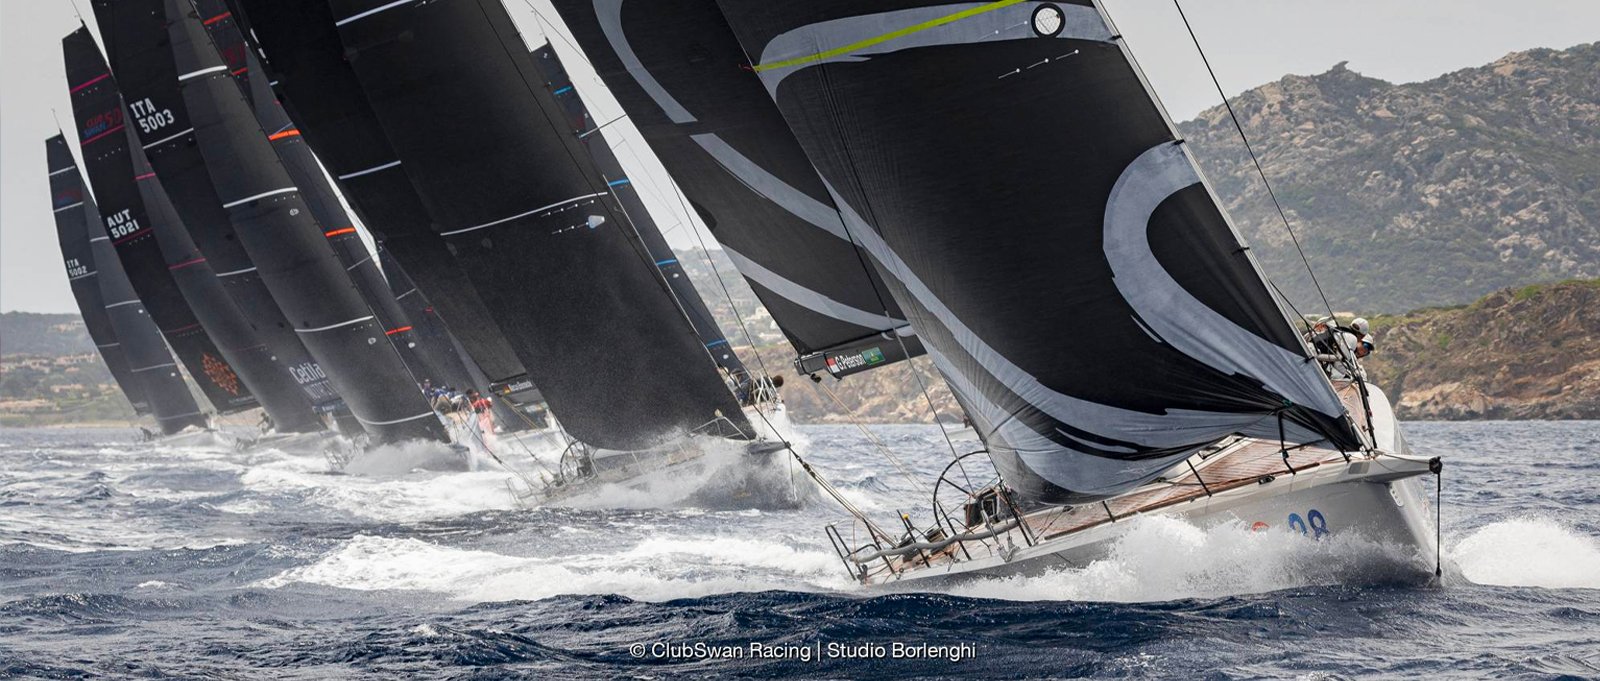 FOLLOW THE RACES OF CLUBSWAN RACING